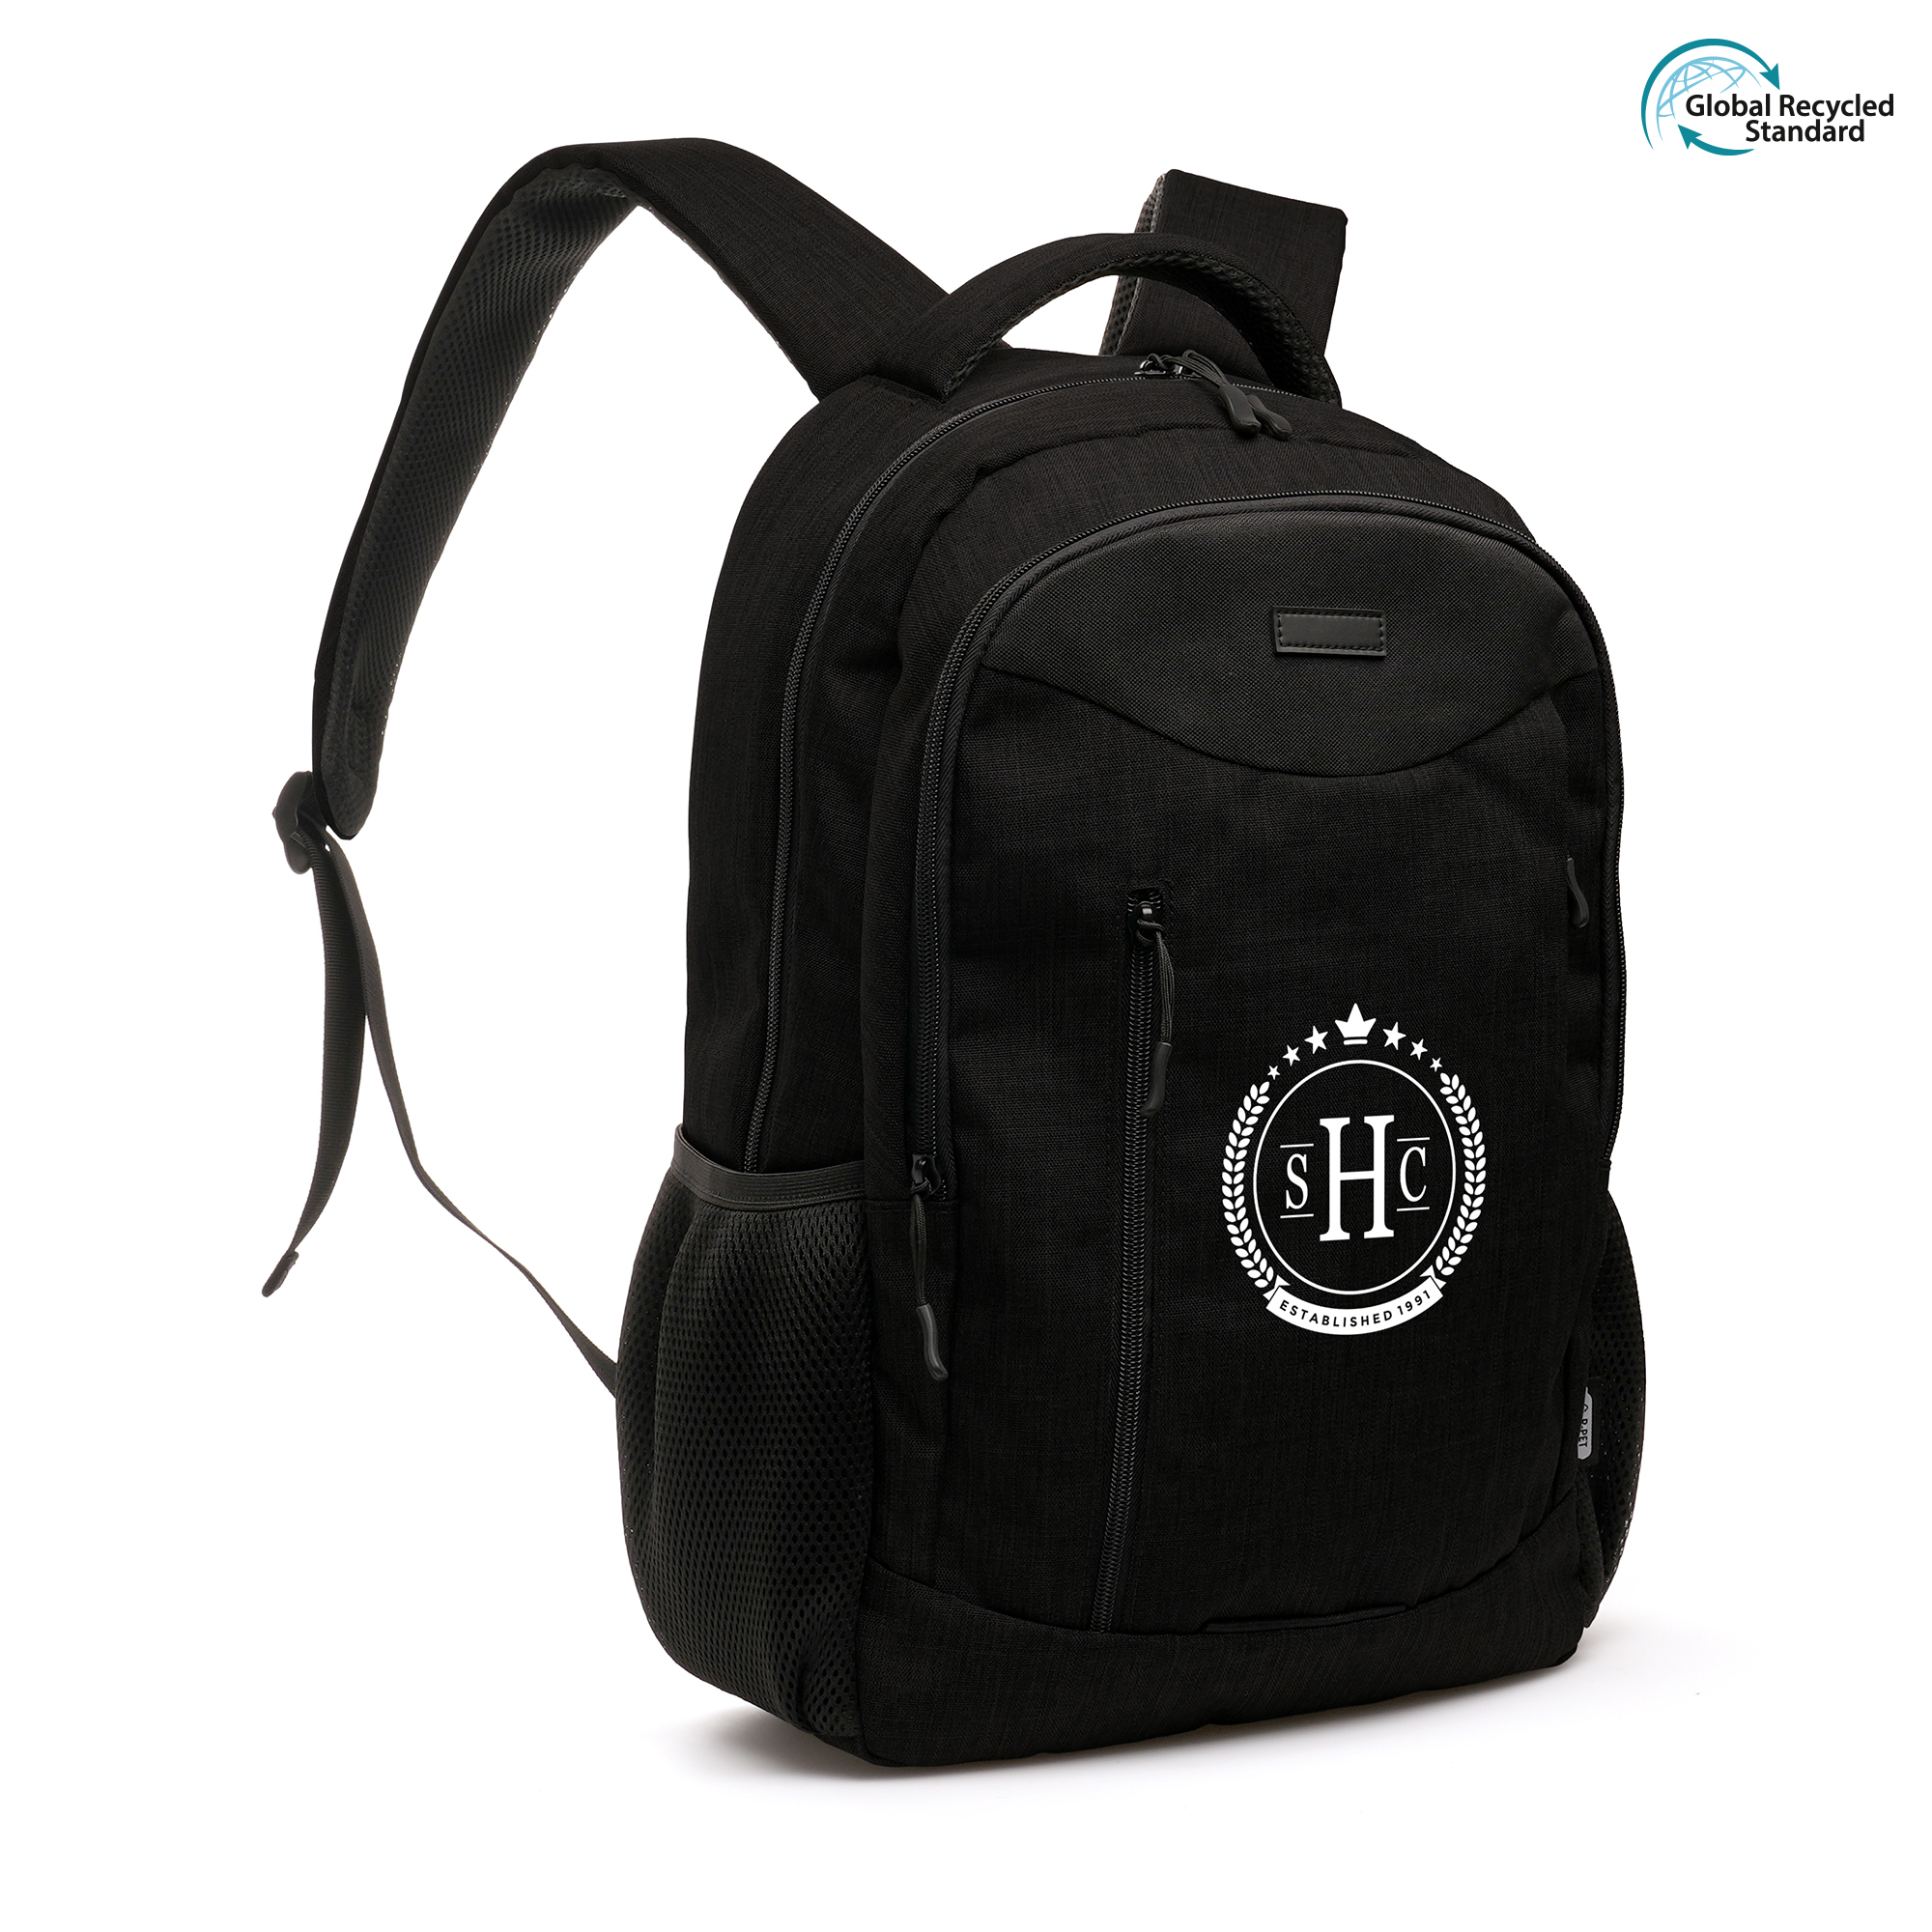 Crafted with RPET, featuring small zip compartment to front, two main compartments with padded laptop pocket and two side pockets. Padded adjustable shoulder straps and luggage strap for on the go convenience.